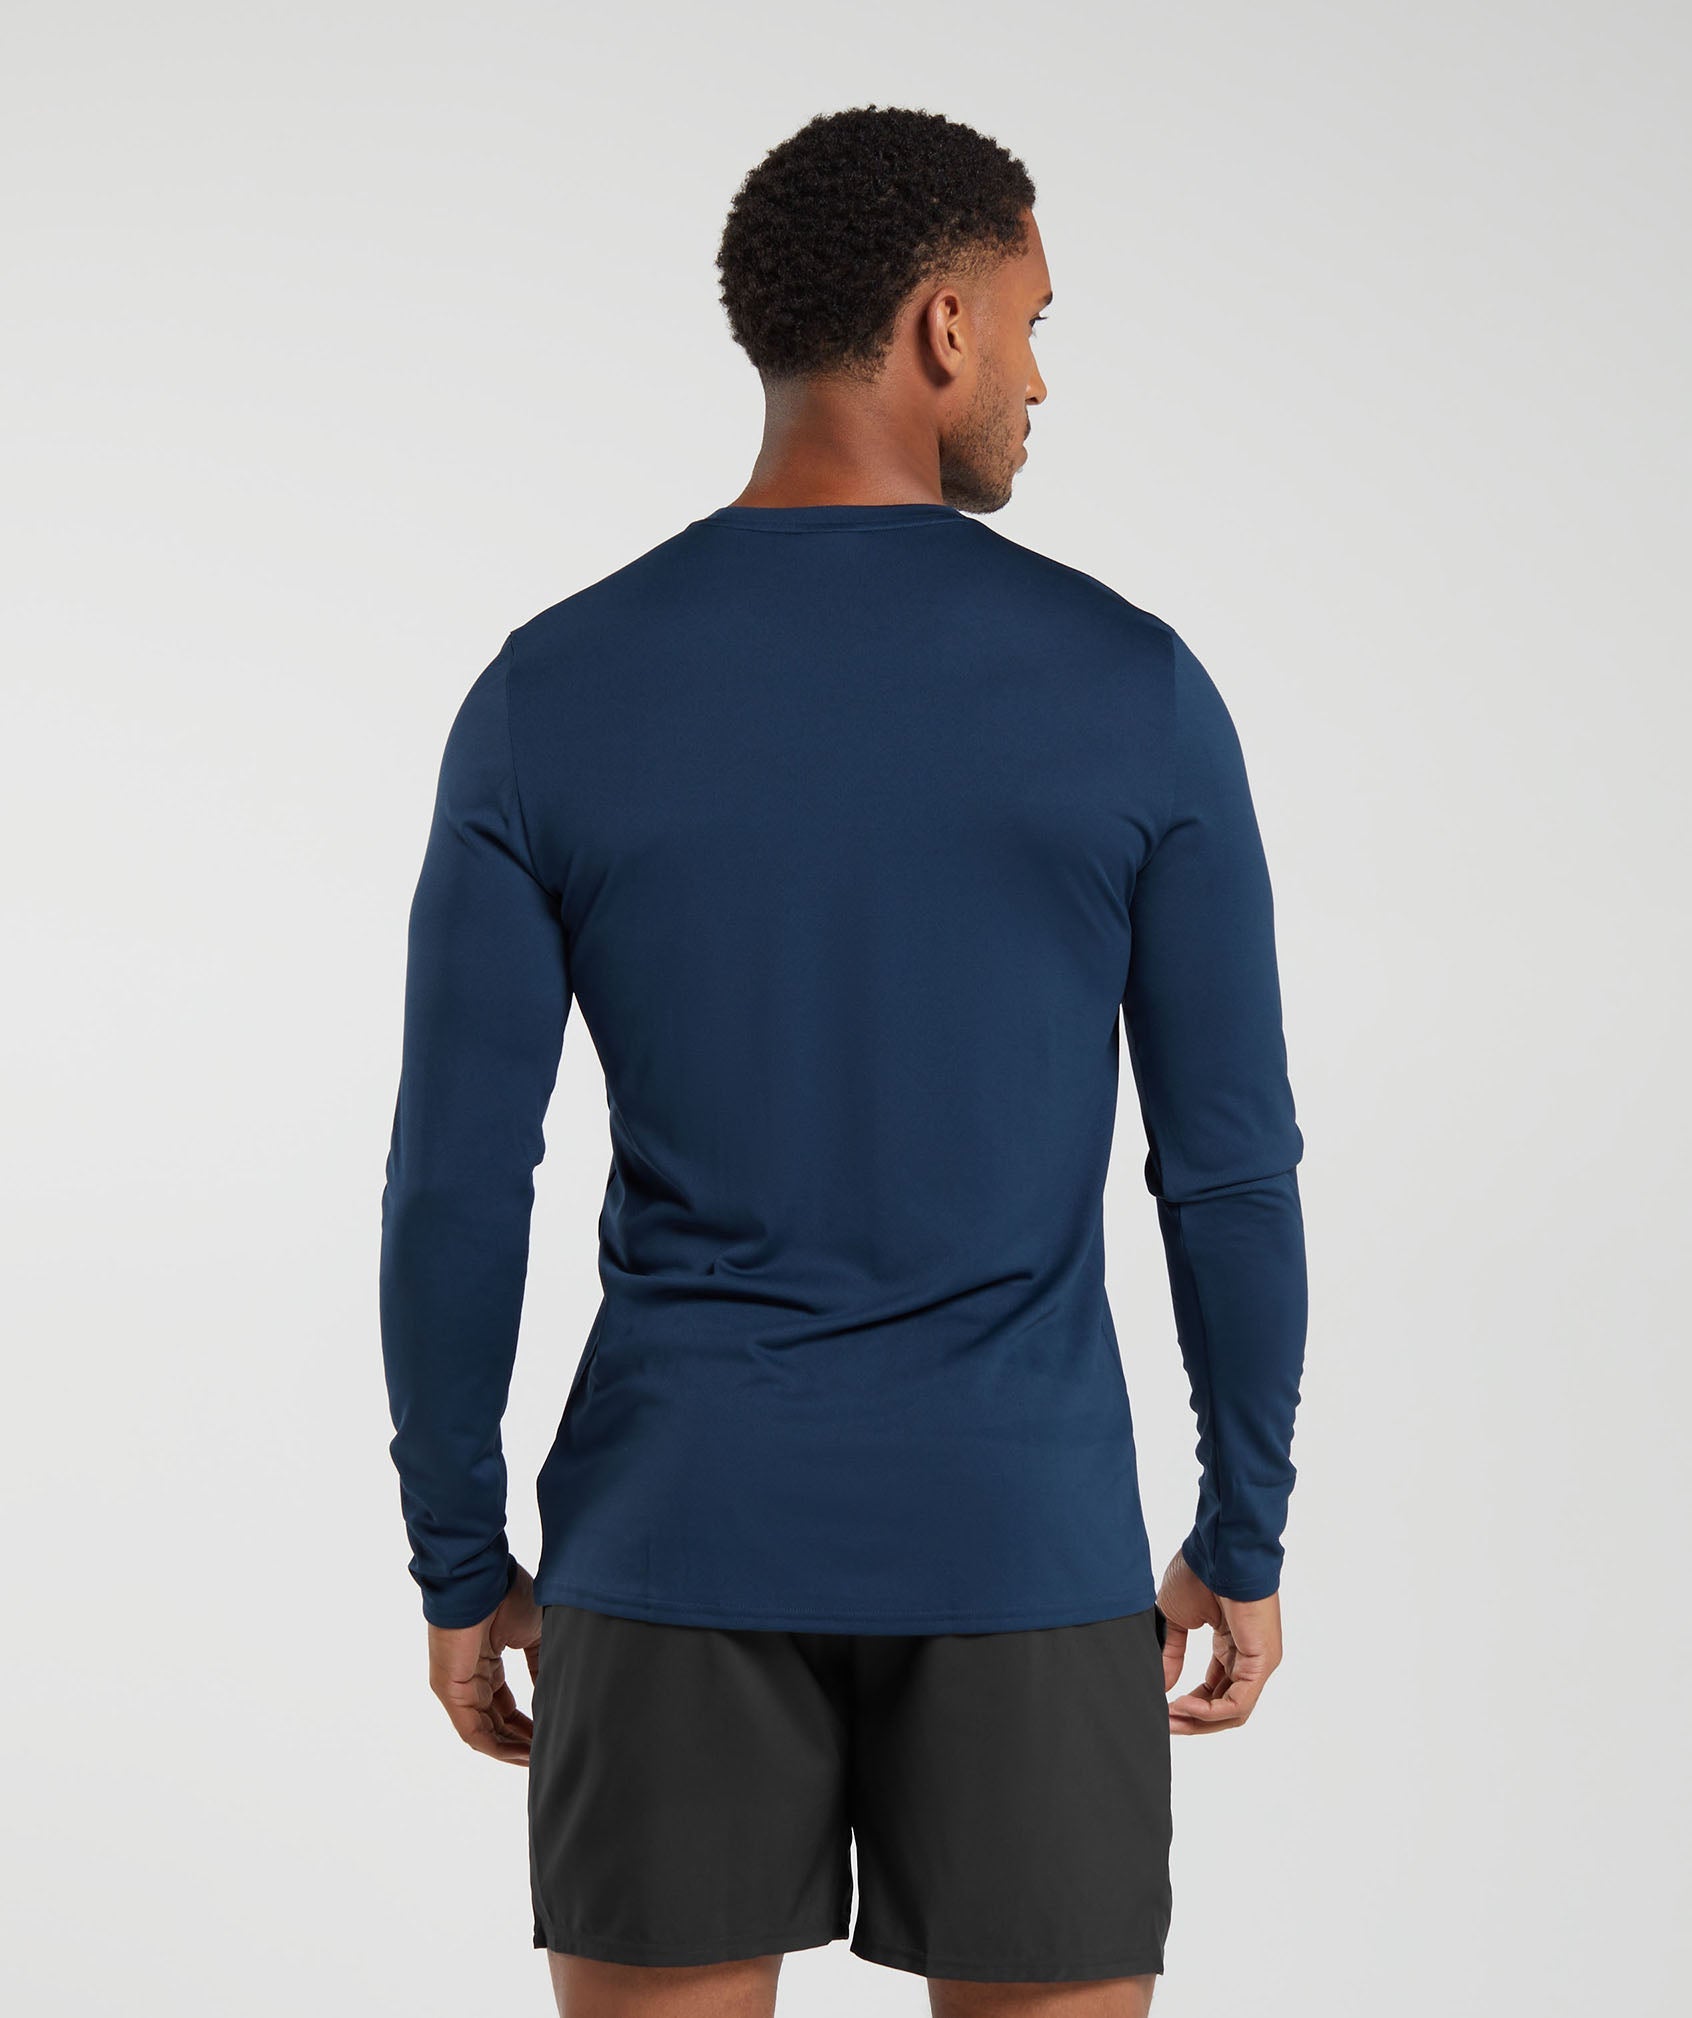 Arrival Long Sleeve T-Shirt in Navy - view 2